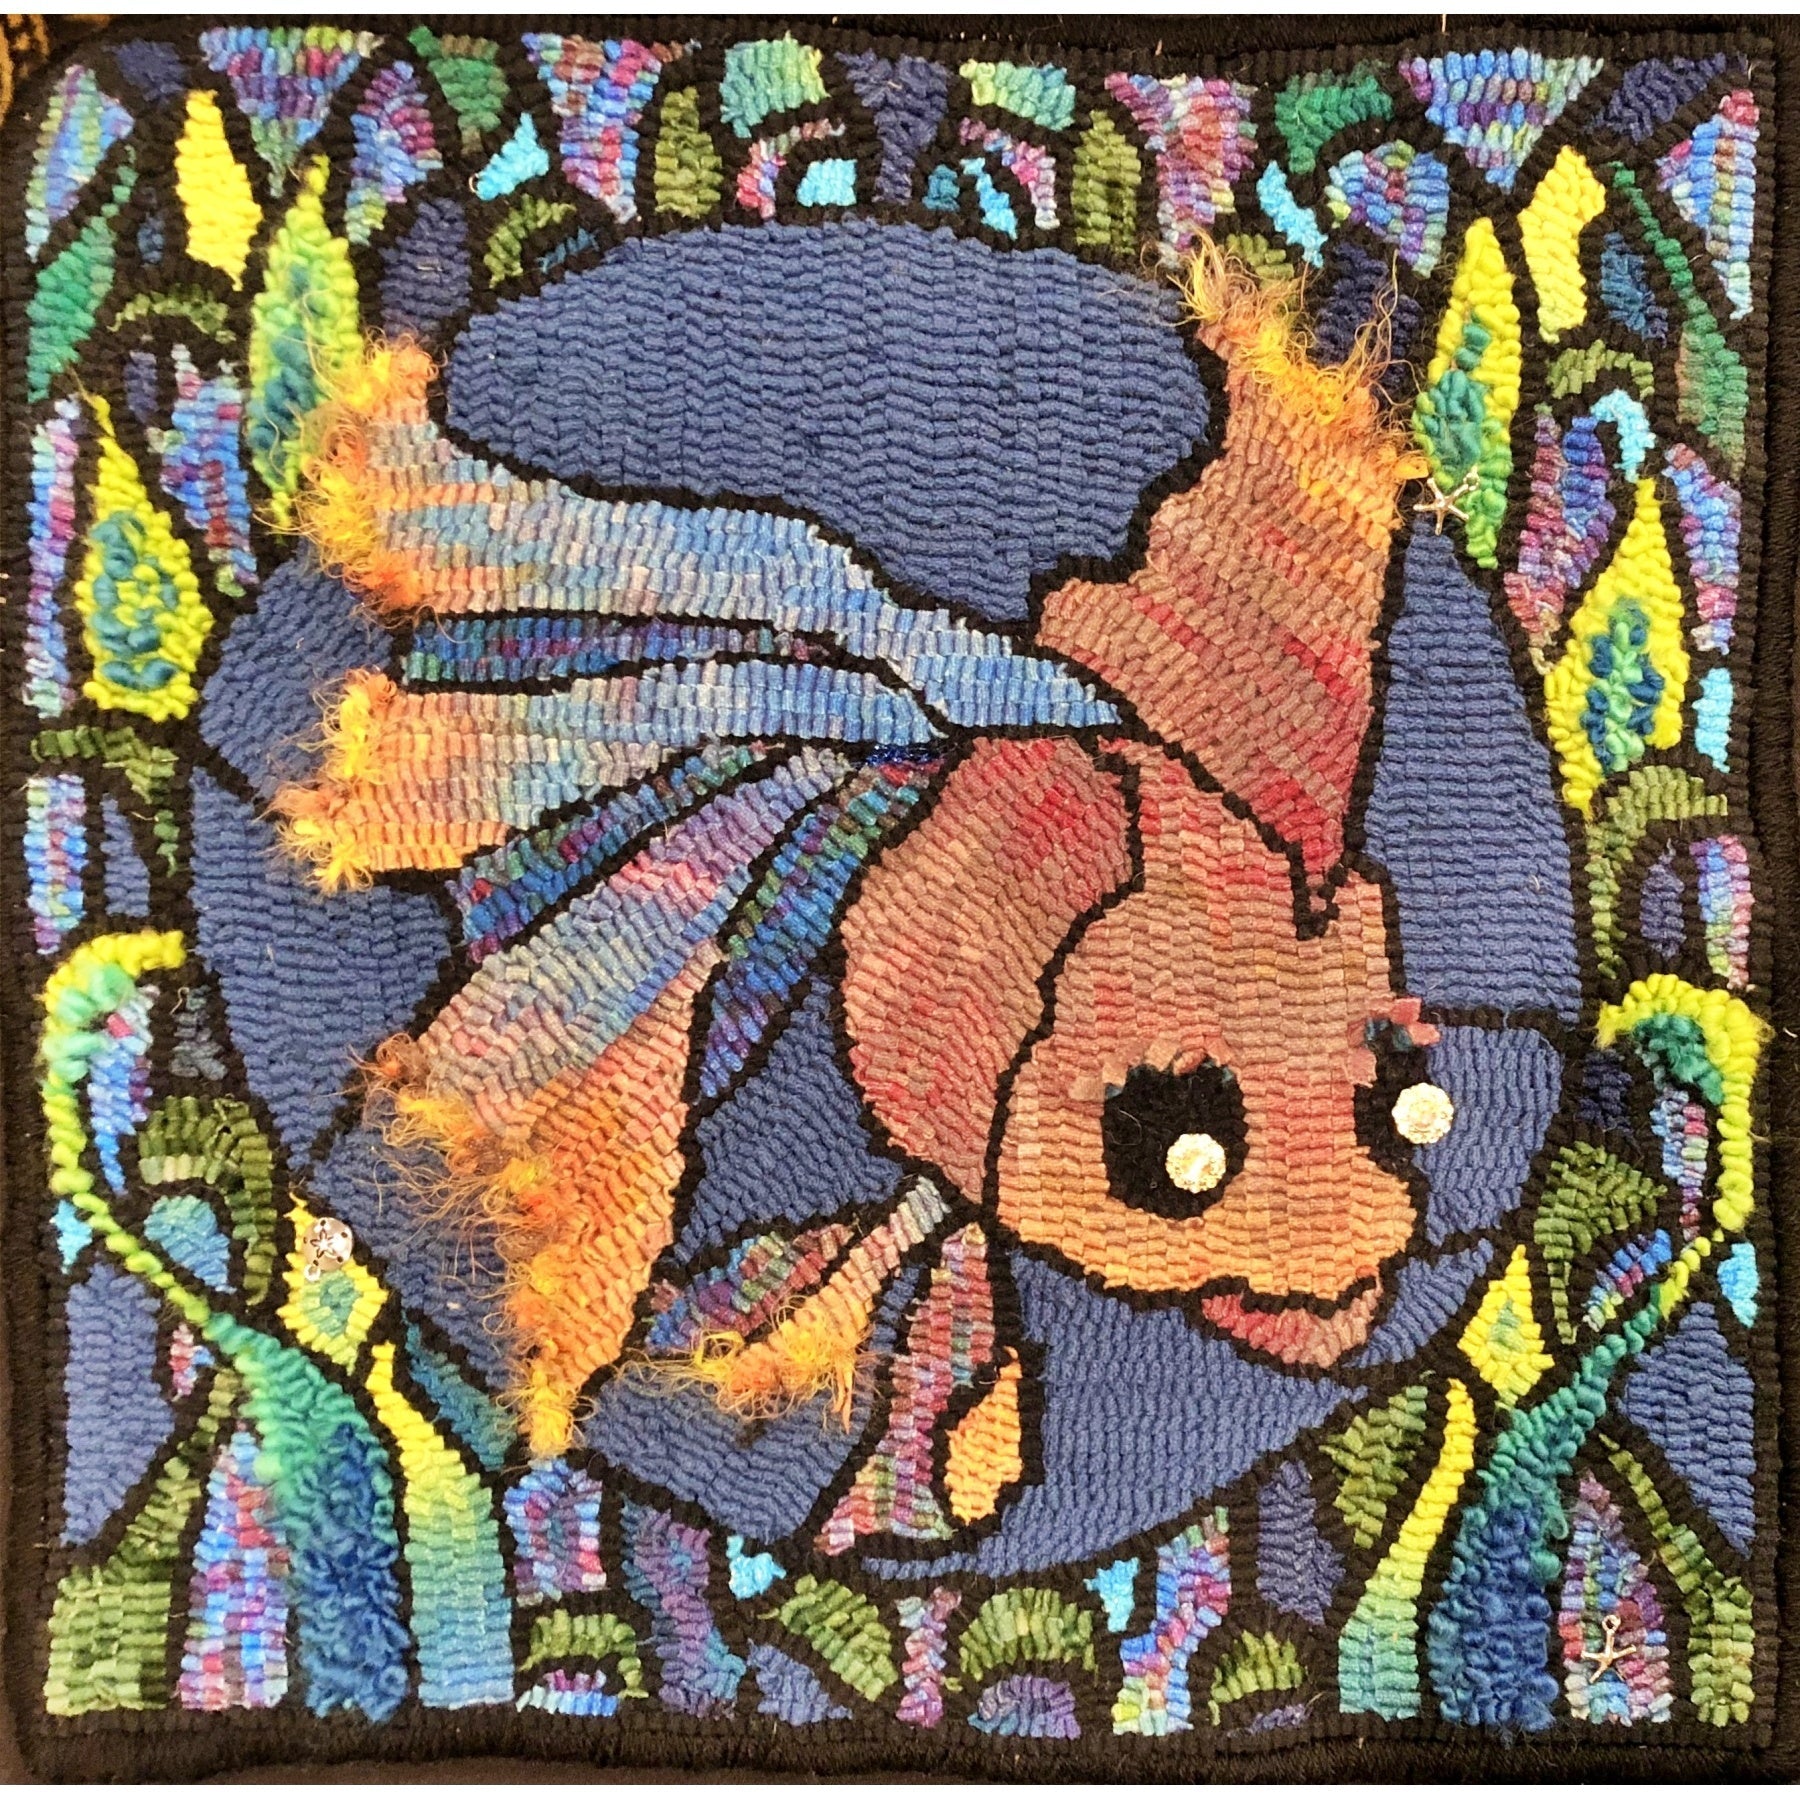 Stained Glass Fish, rug hooked by Anita Bahls